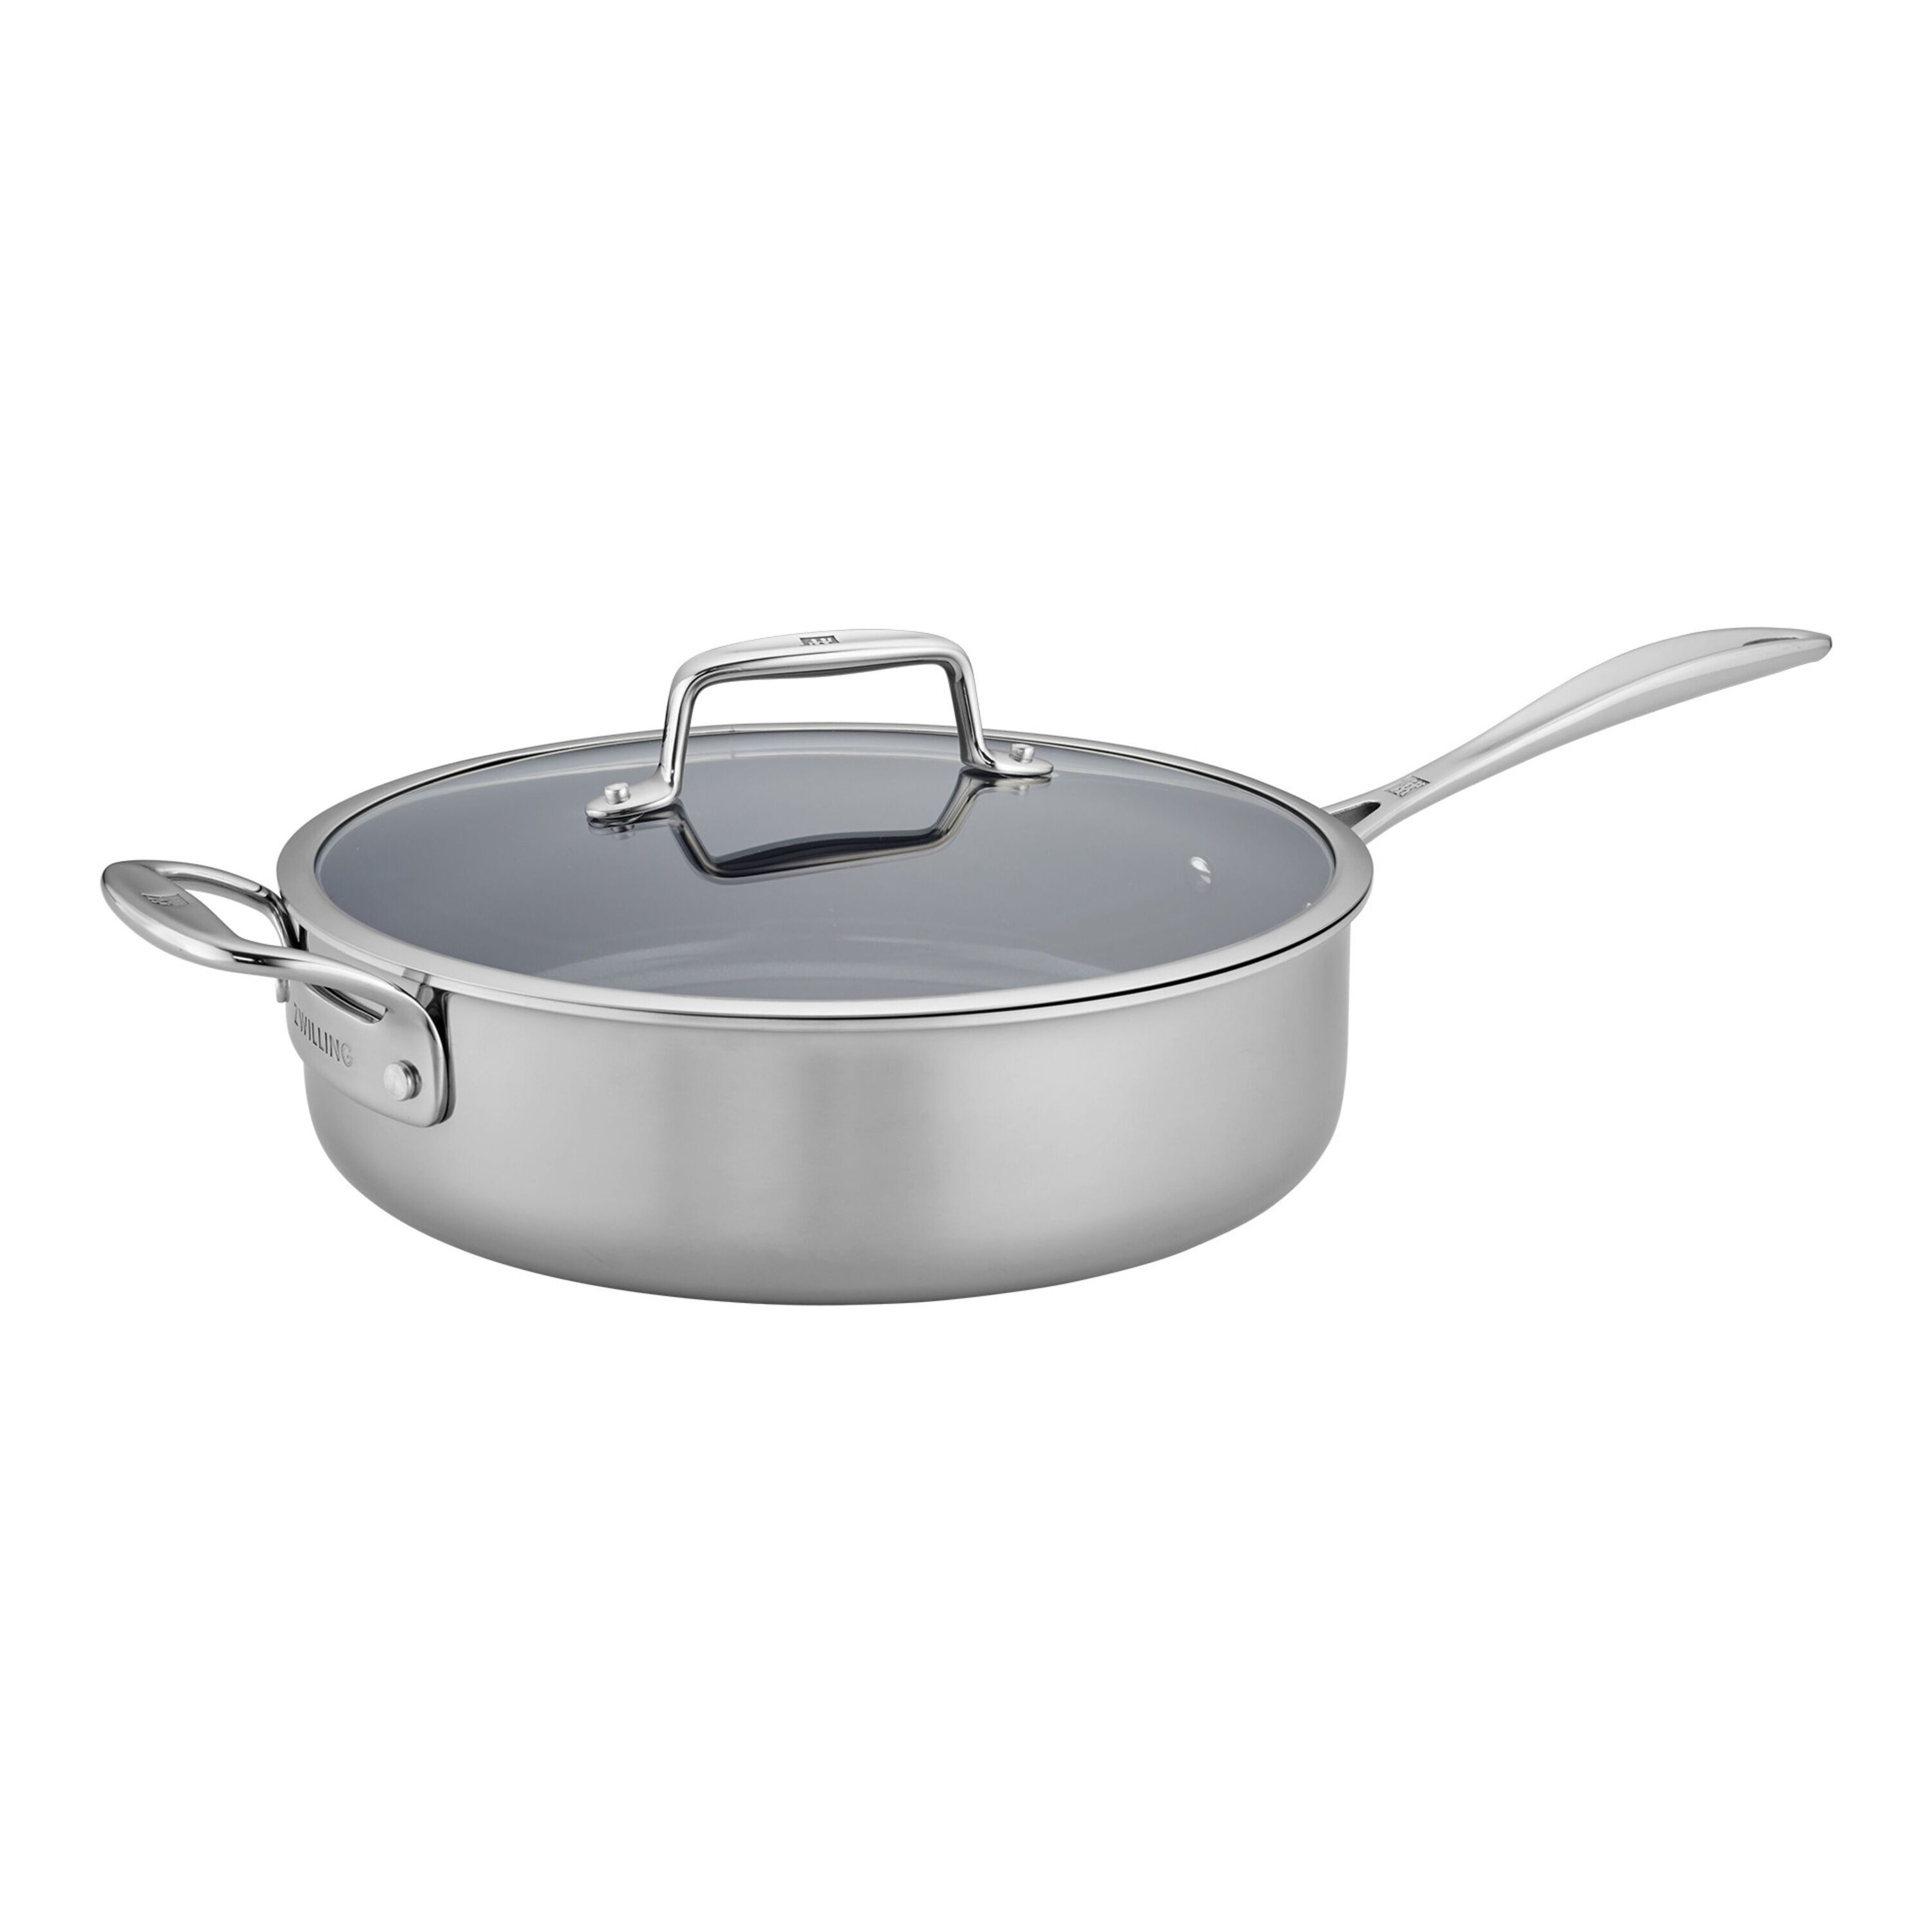 All-Clad Stainless Steel 6-Quart Deep Sauté Pan with Lid